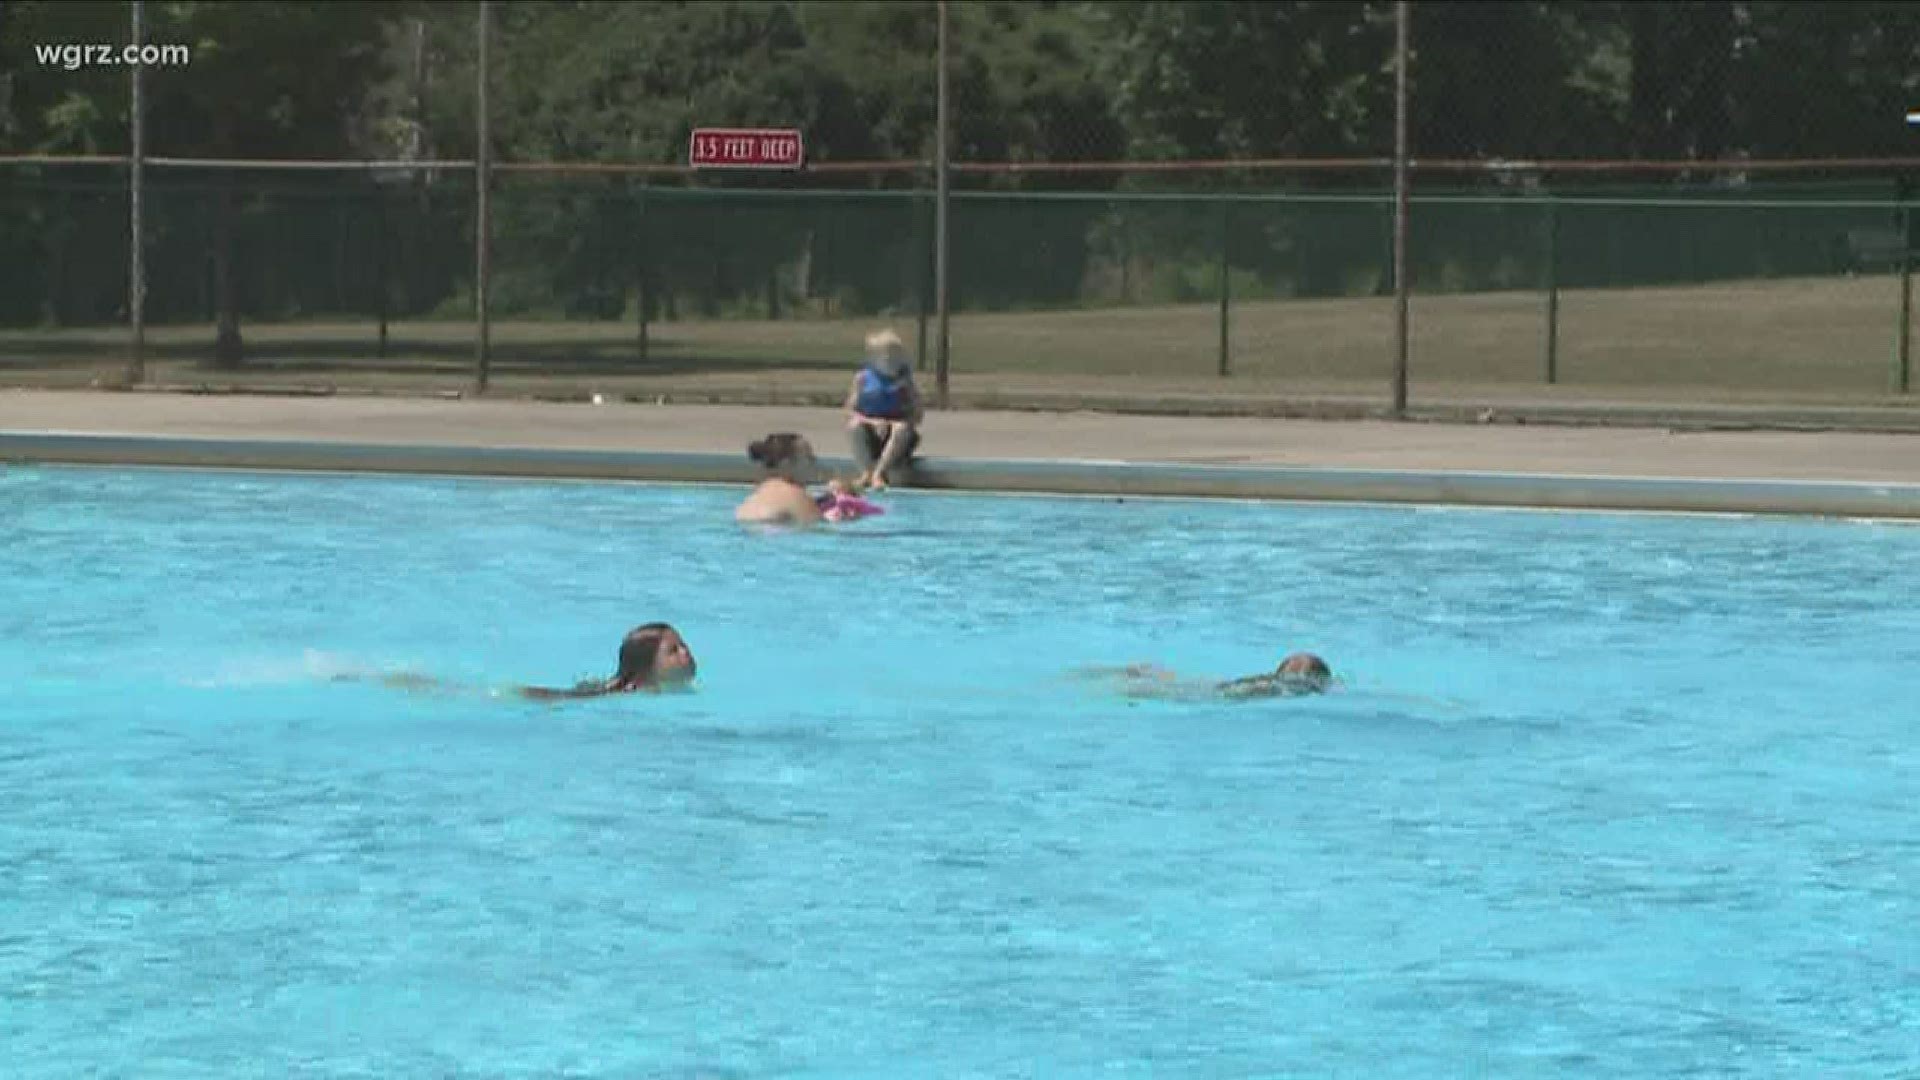 On hot days like today, you'll find a lot of people at public pools, splash-pads or at a local cooling center. But because of the pandemic, big changes are coming.